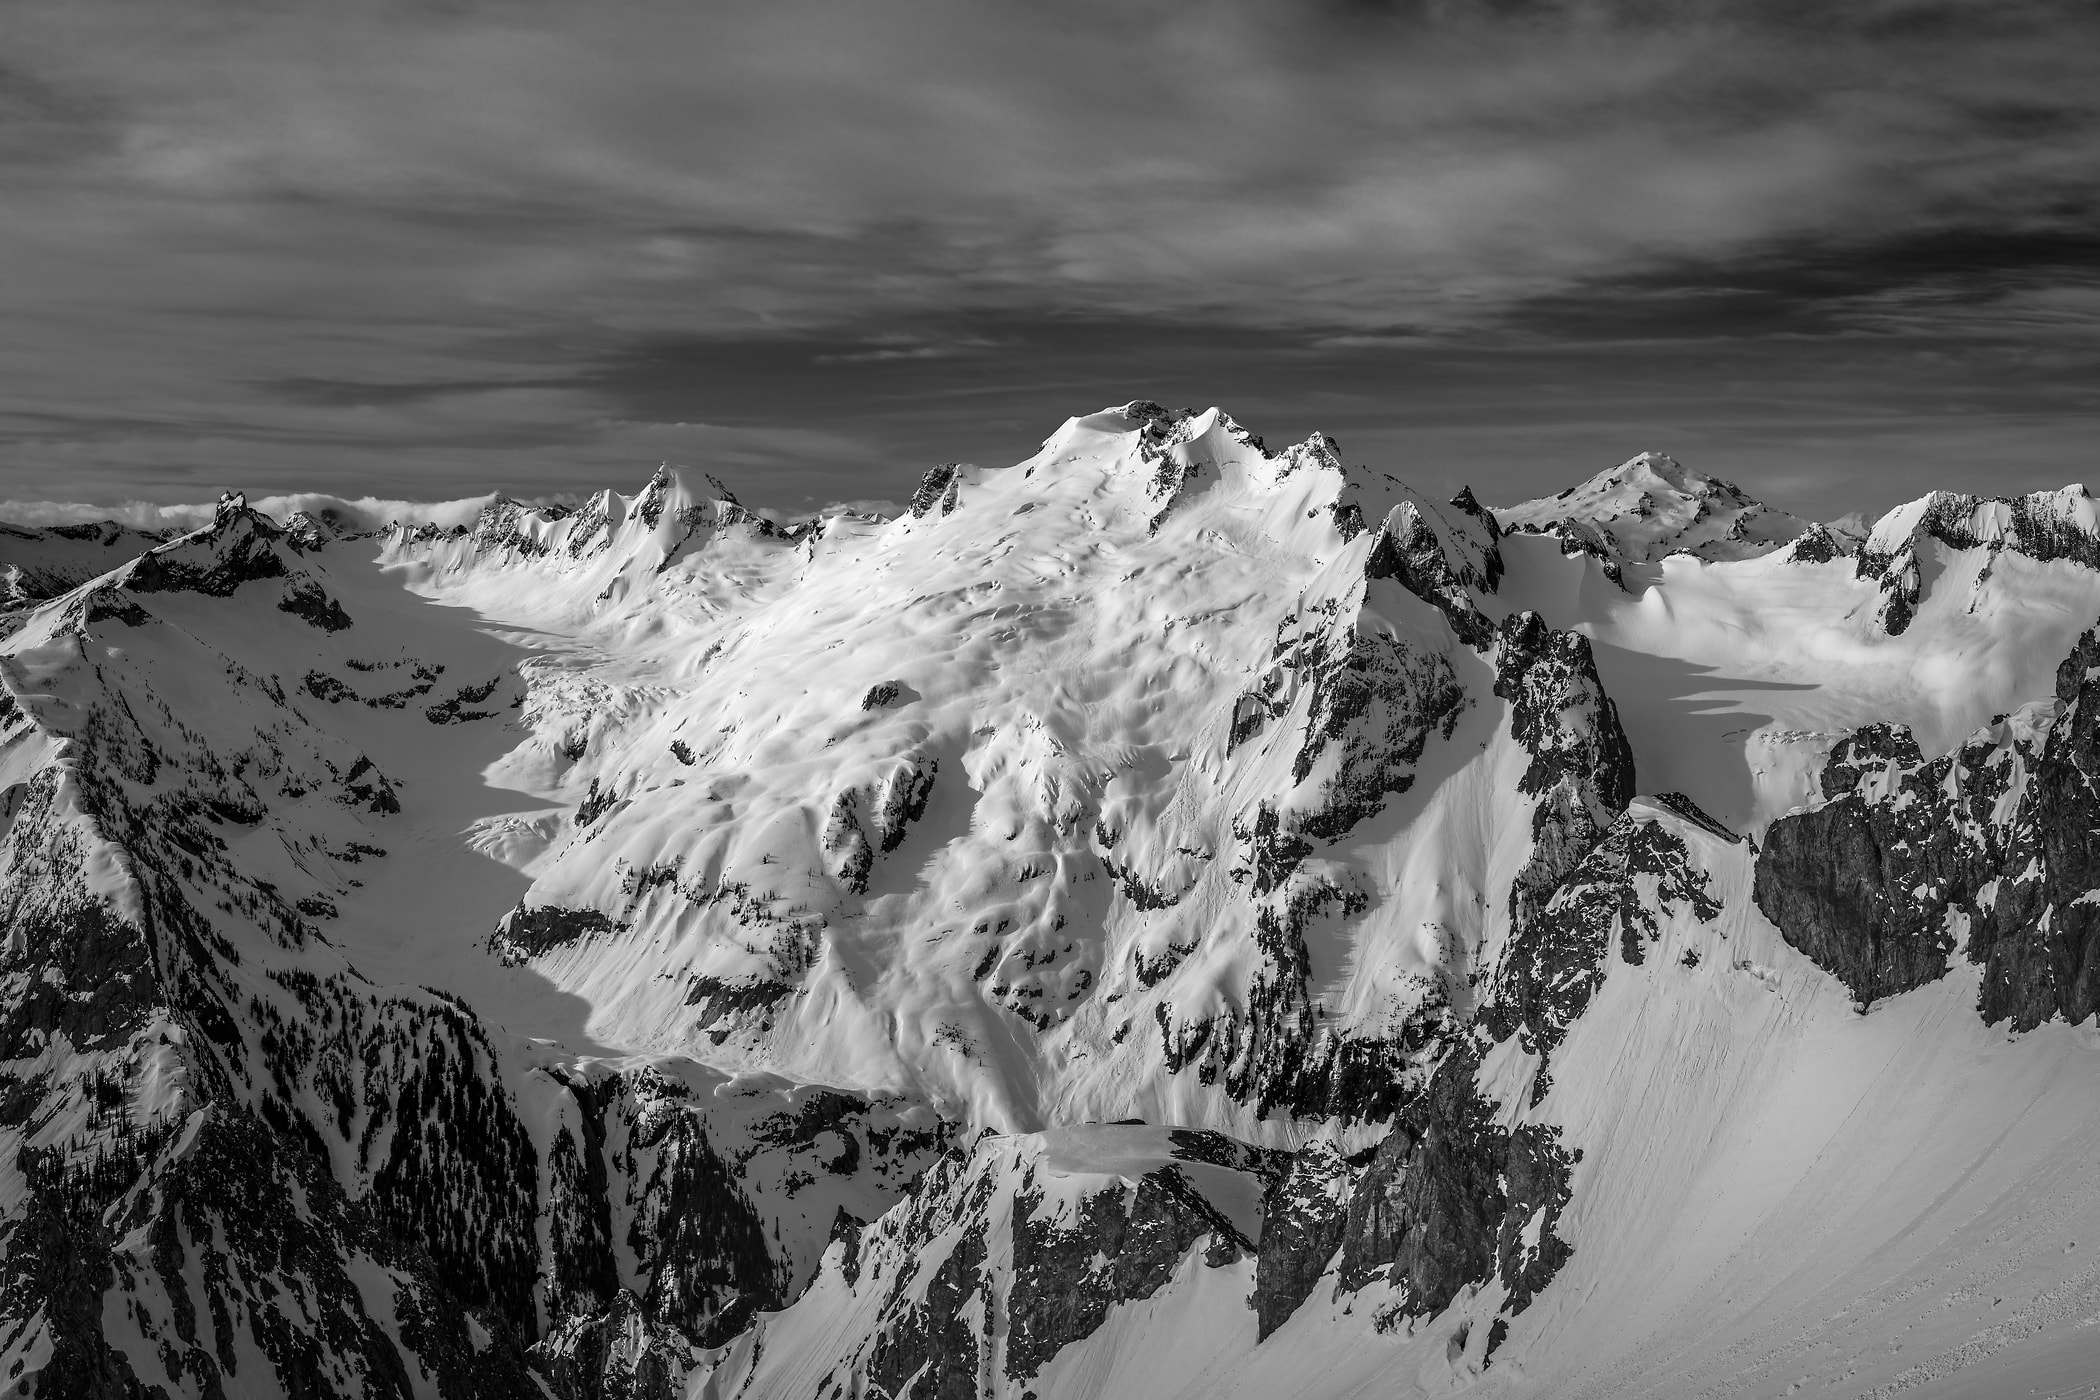 216 megapixels! A very high resolution, large-format VAST photo print of ski tracks down a large mountain; artistic black and white photograph created by Scott Rinckenberger in Dome Peak, Glacier Peak Wilderness, Washington.